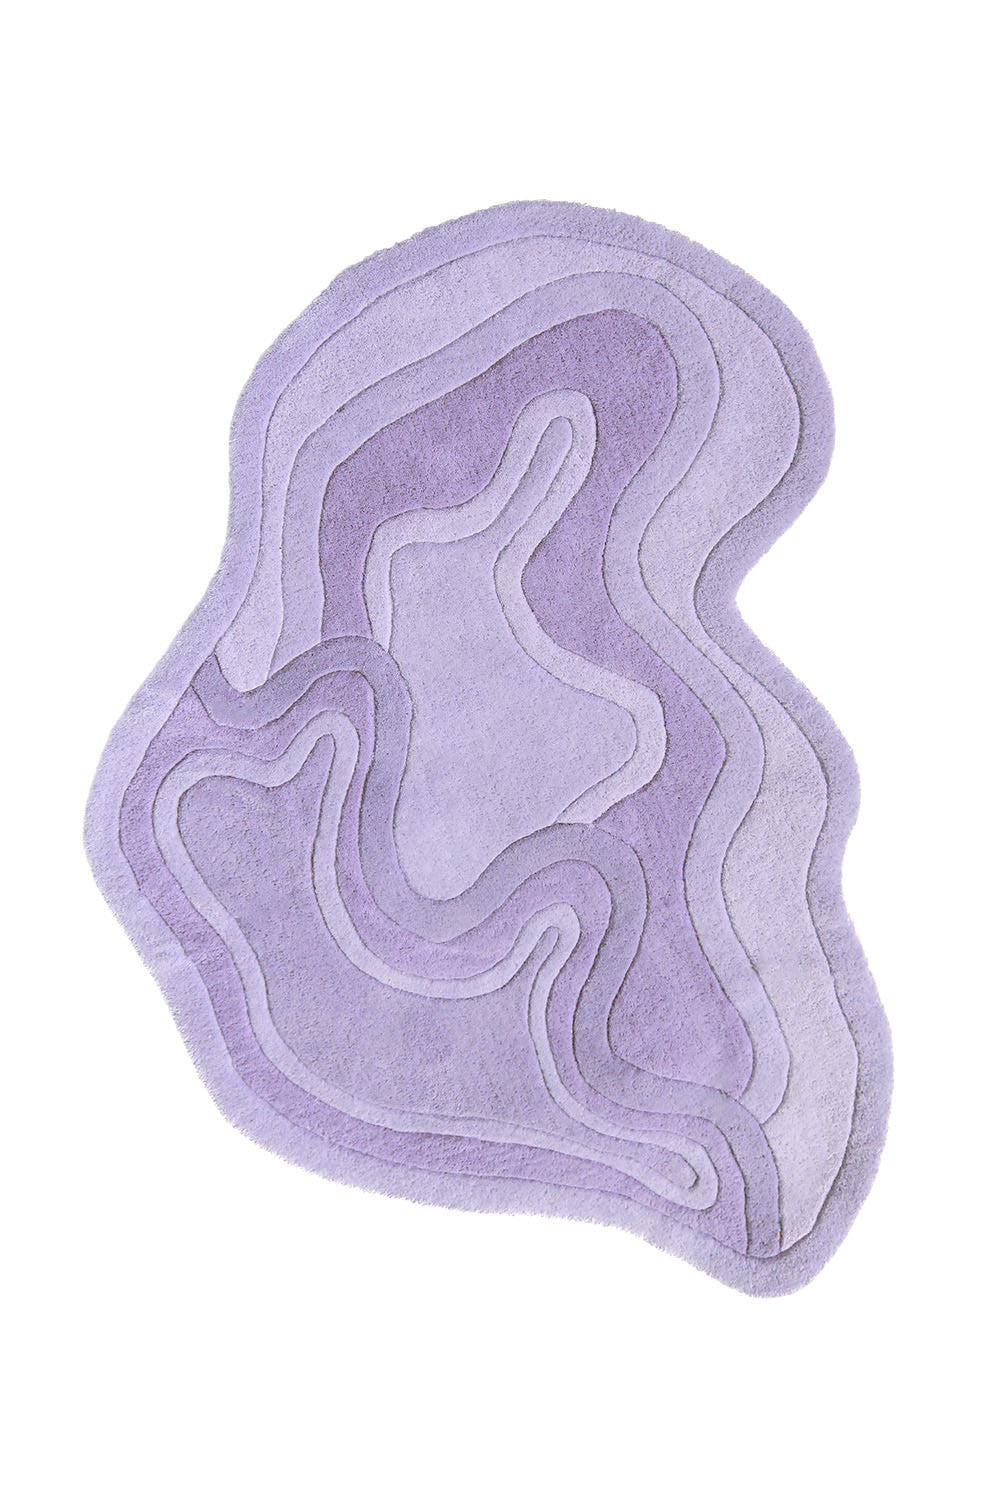 Cool Lavender Asymmetrical Rolling Tides Rug - Hand Tufted Wool for Unique Decor